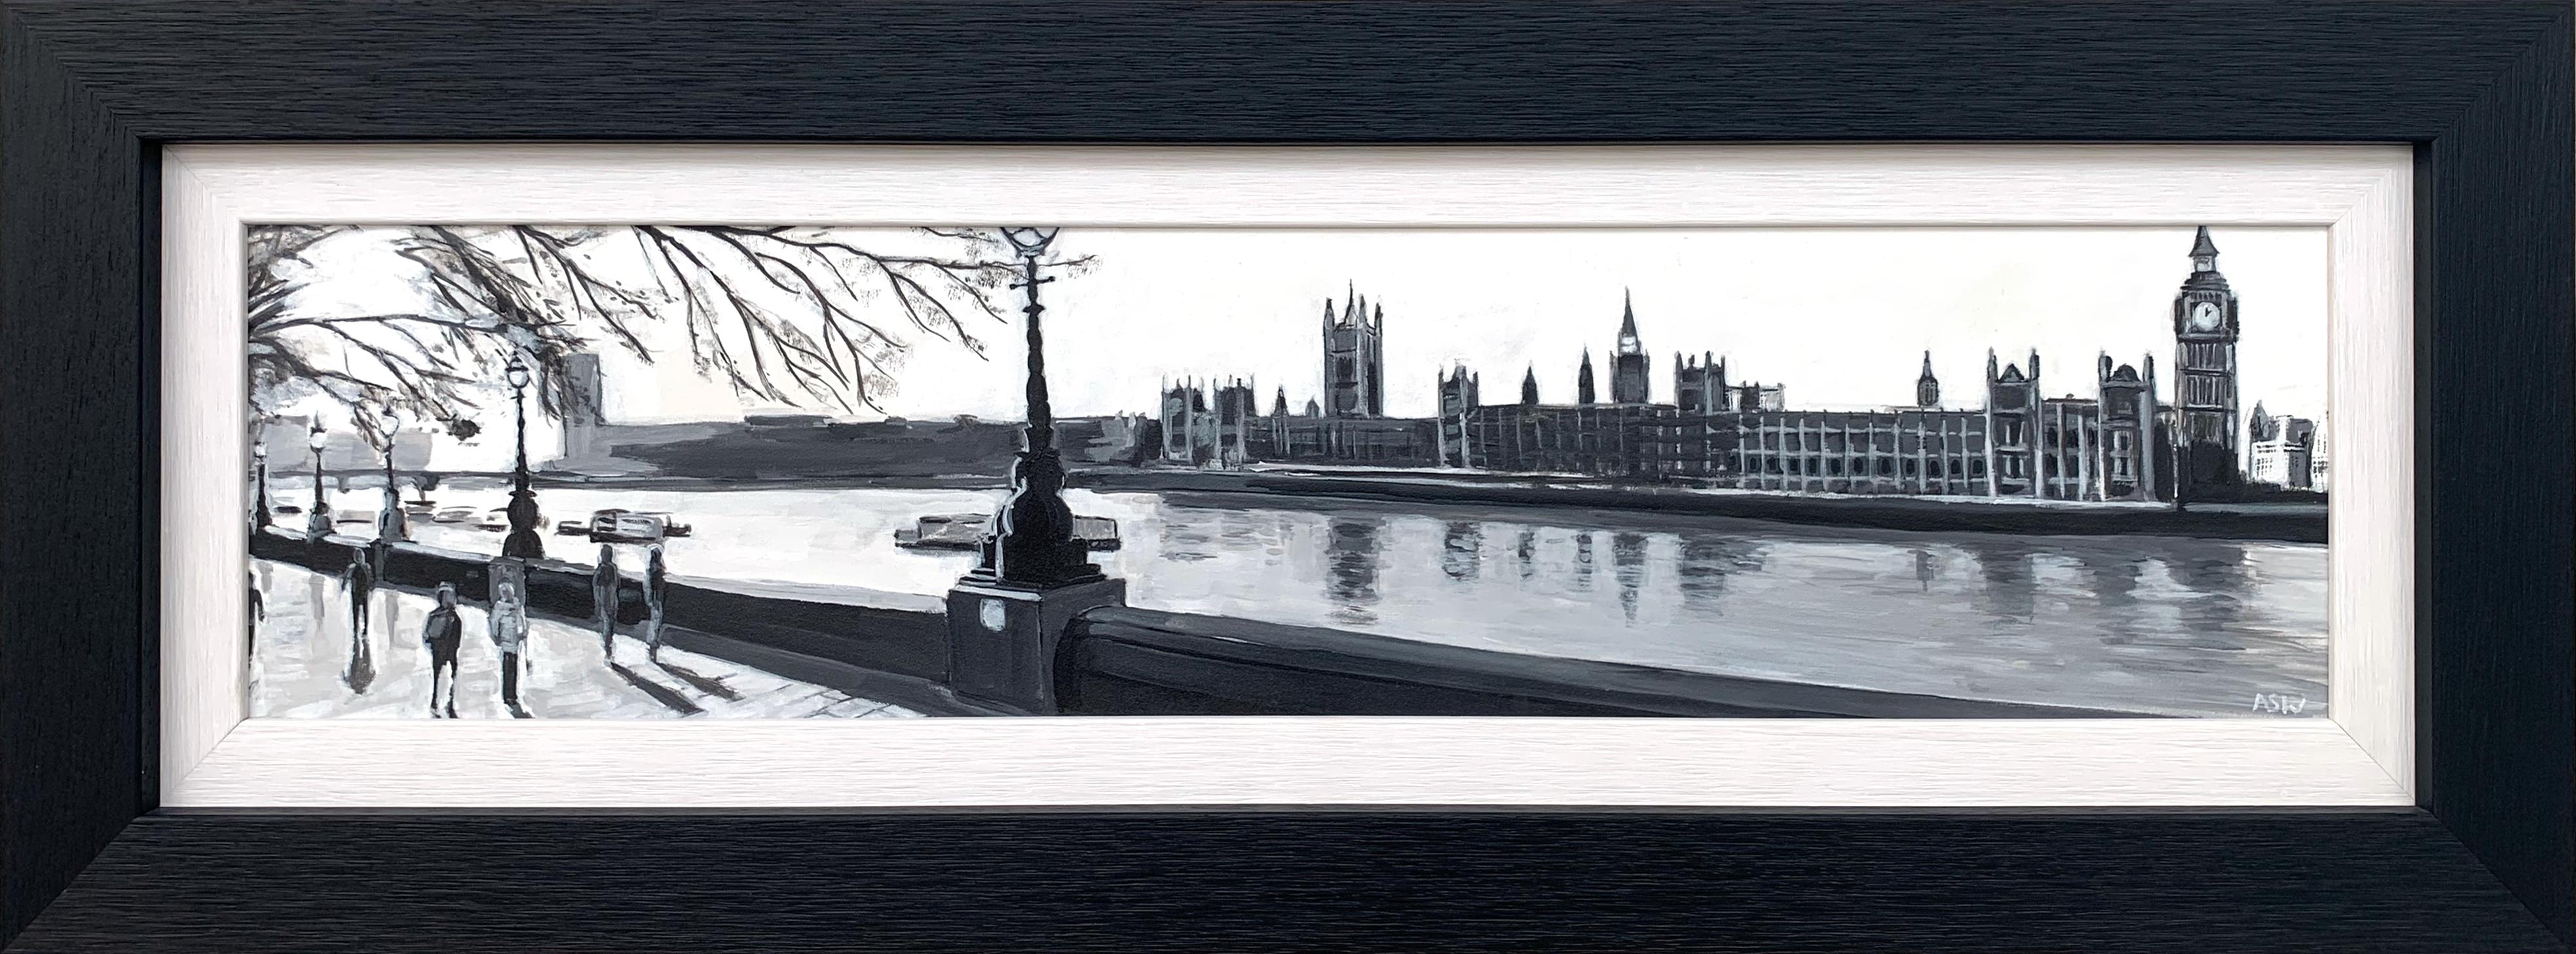 Panoramic Black & White Painting of Westminster Victoria Embankment London City